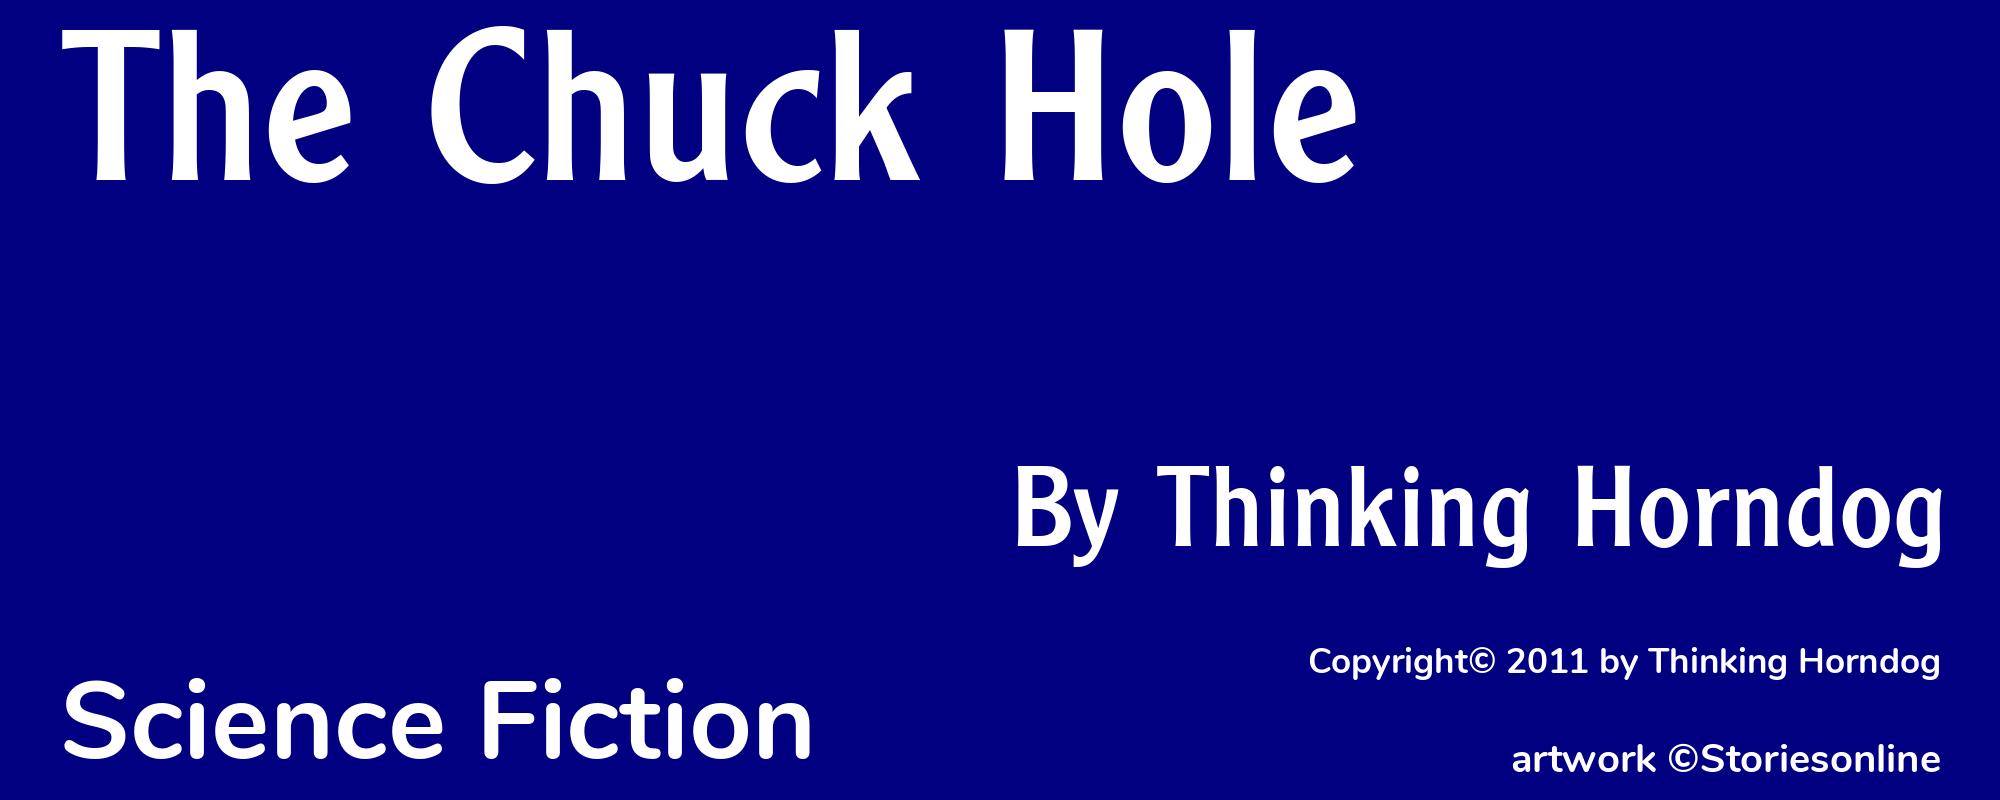 The Chuck Hole - Cover